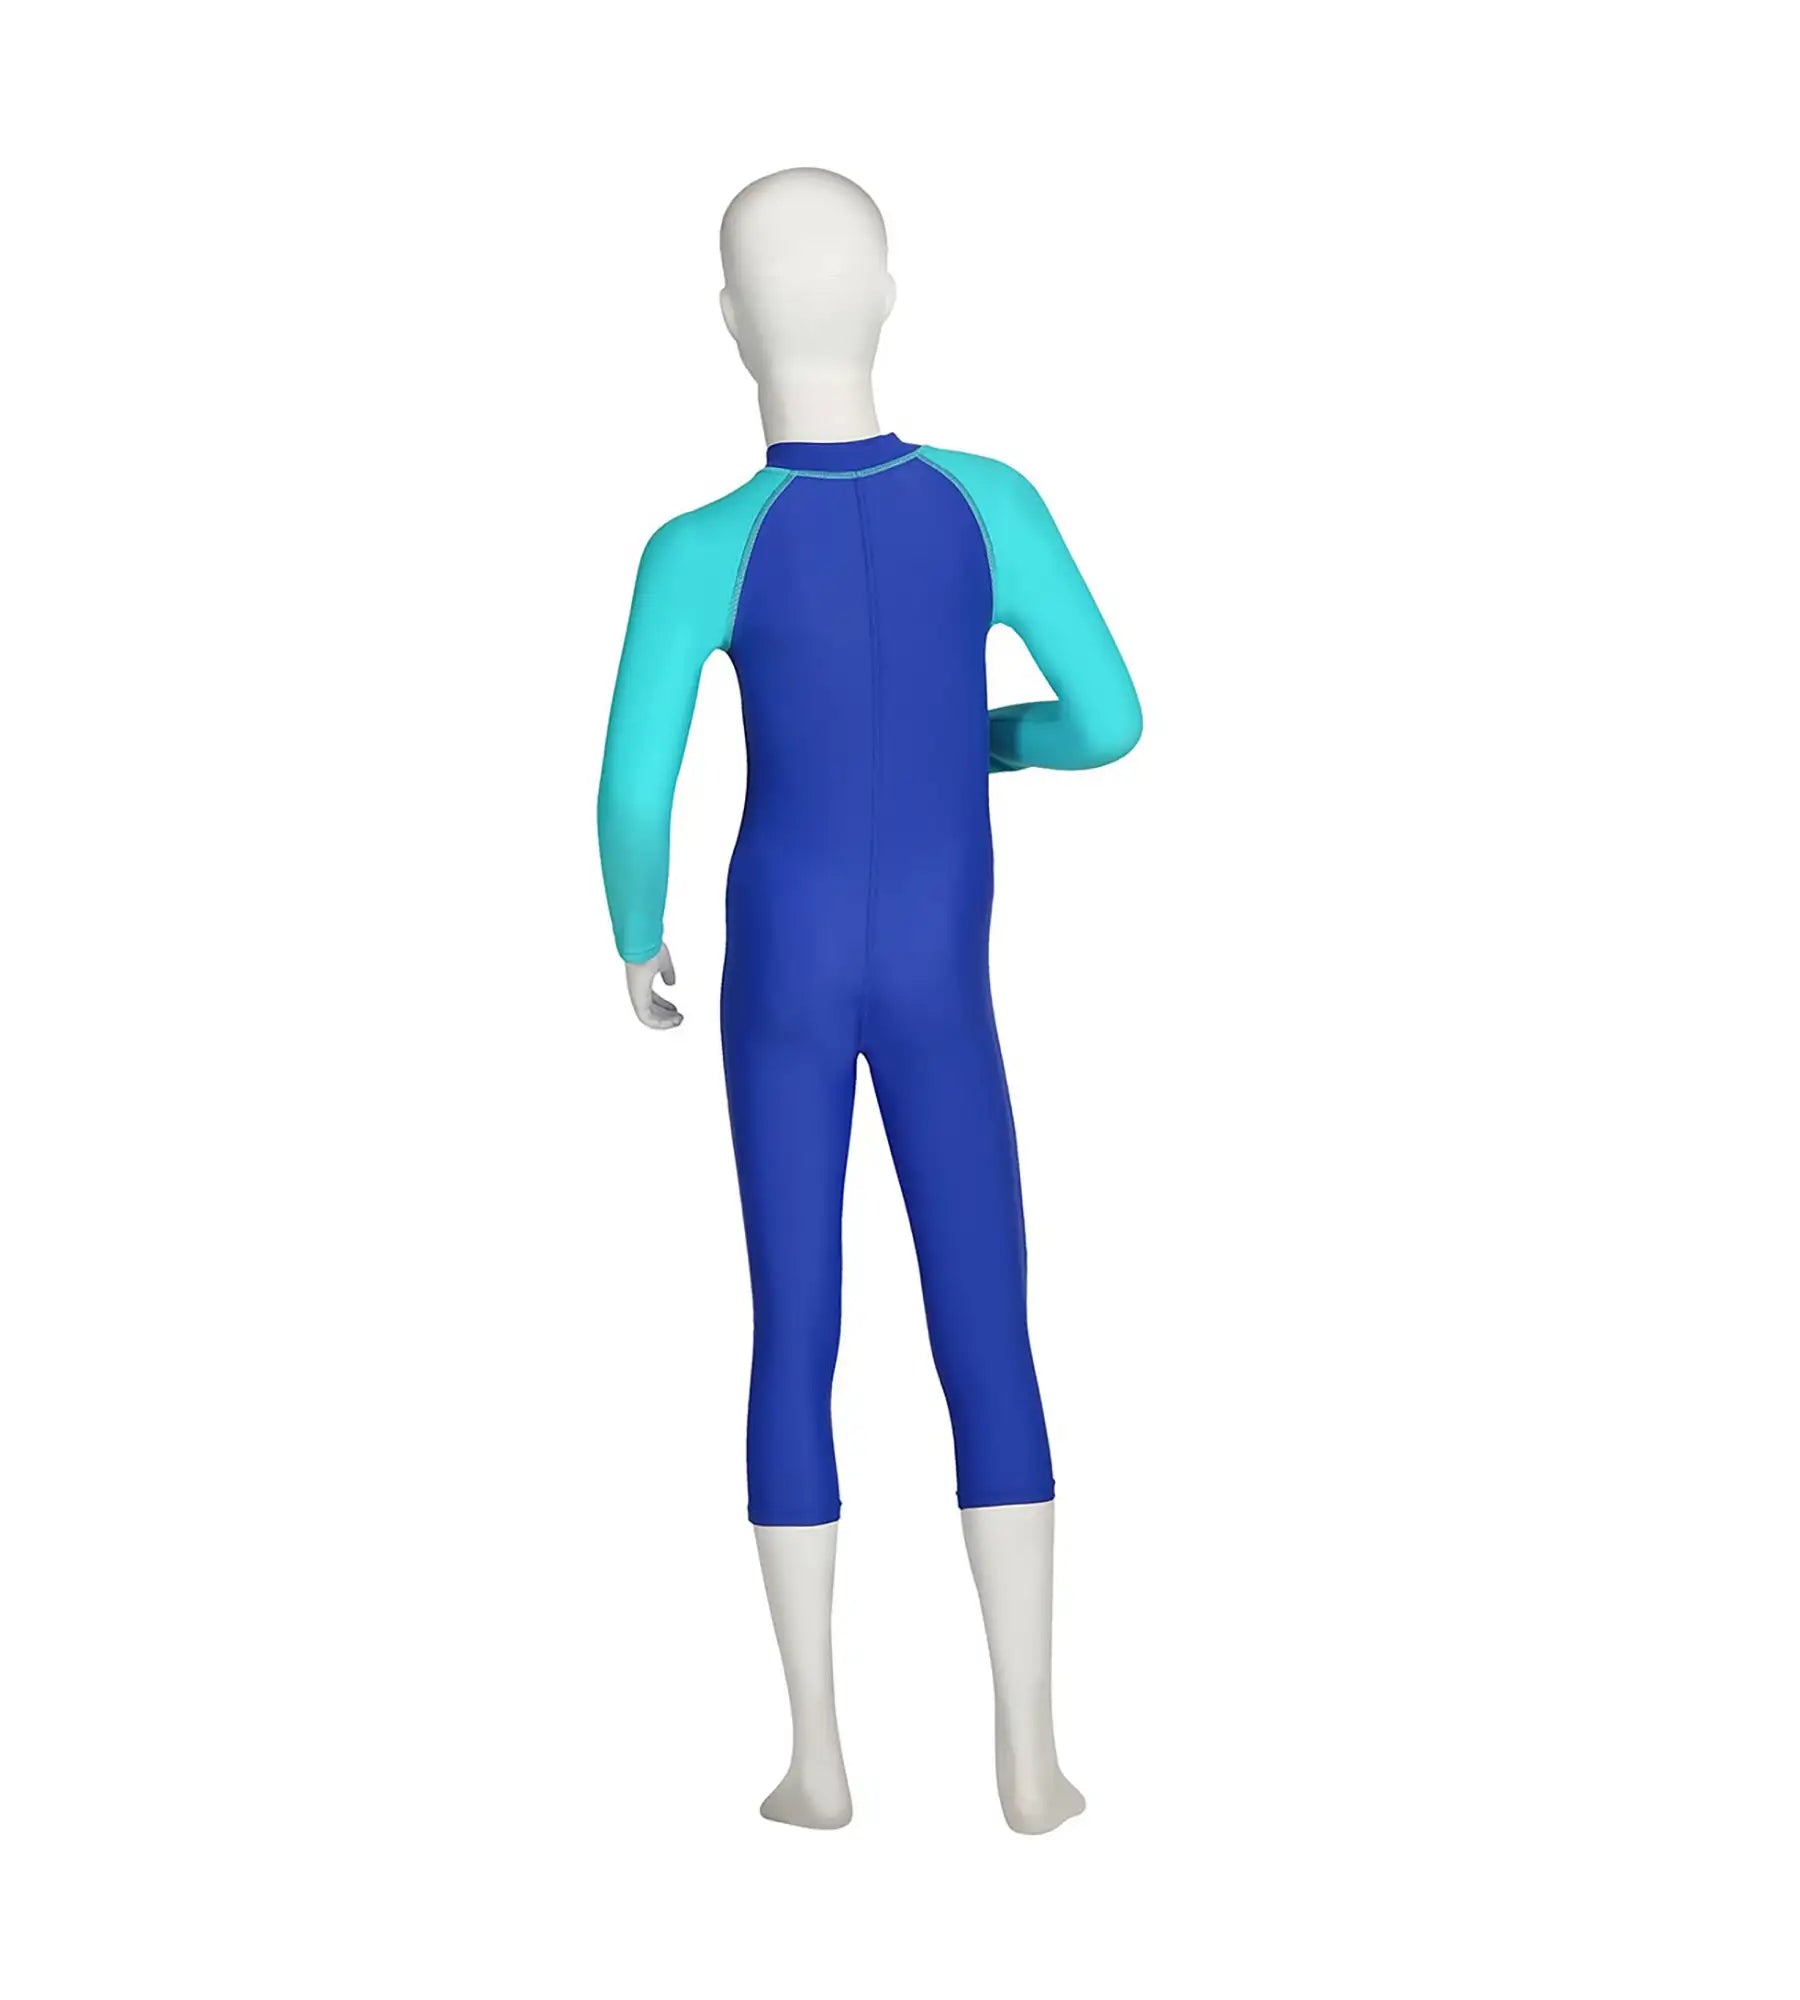 Tots Unisex Endurance All In One Suit - Deep Peri & Bali Blue_4